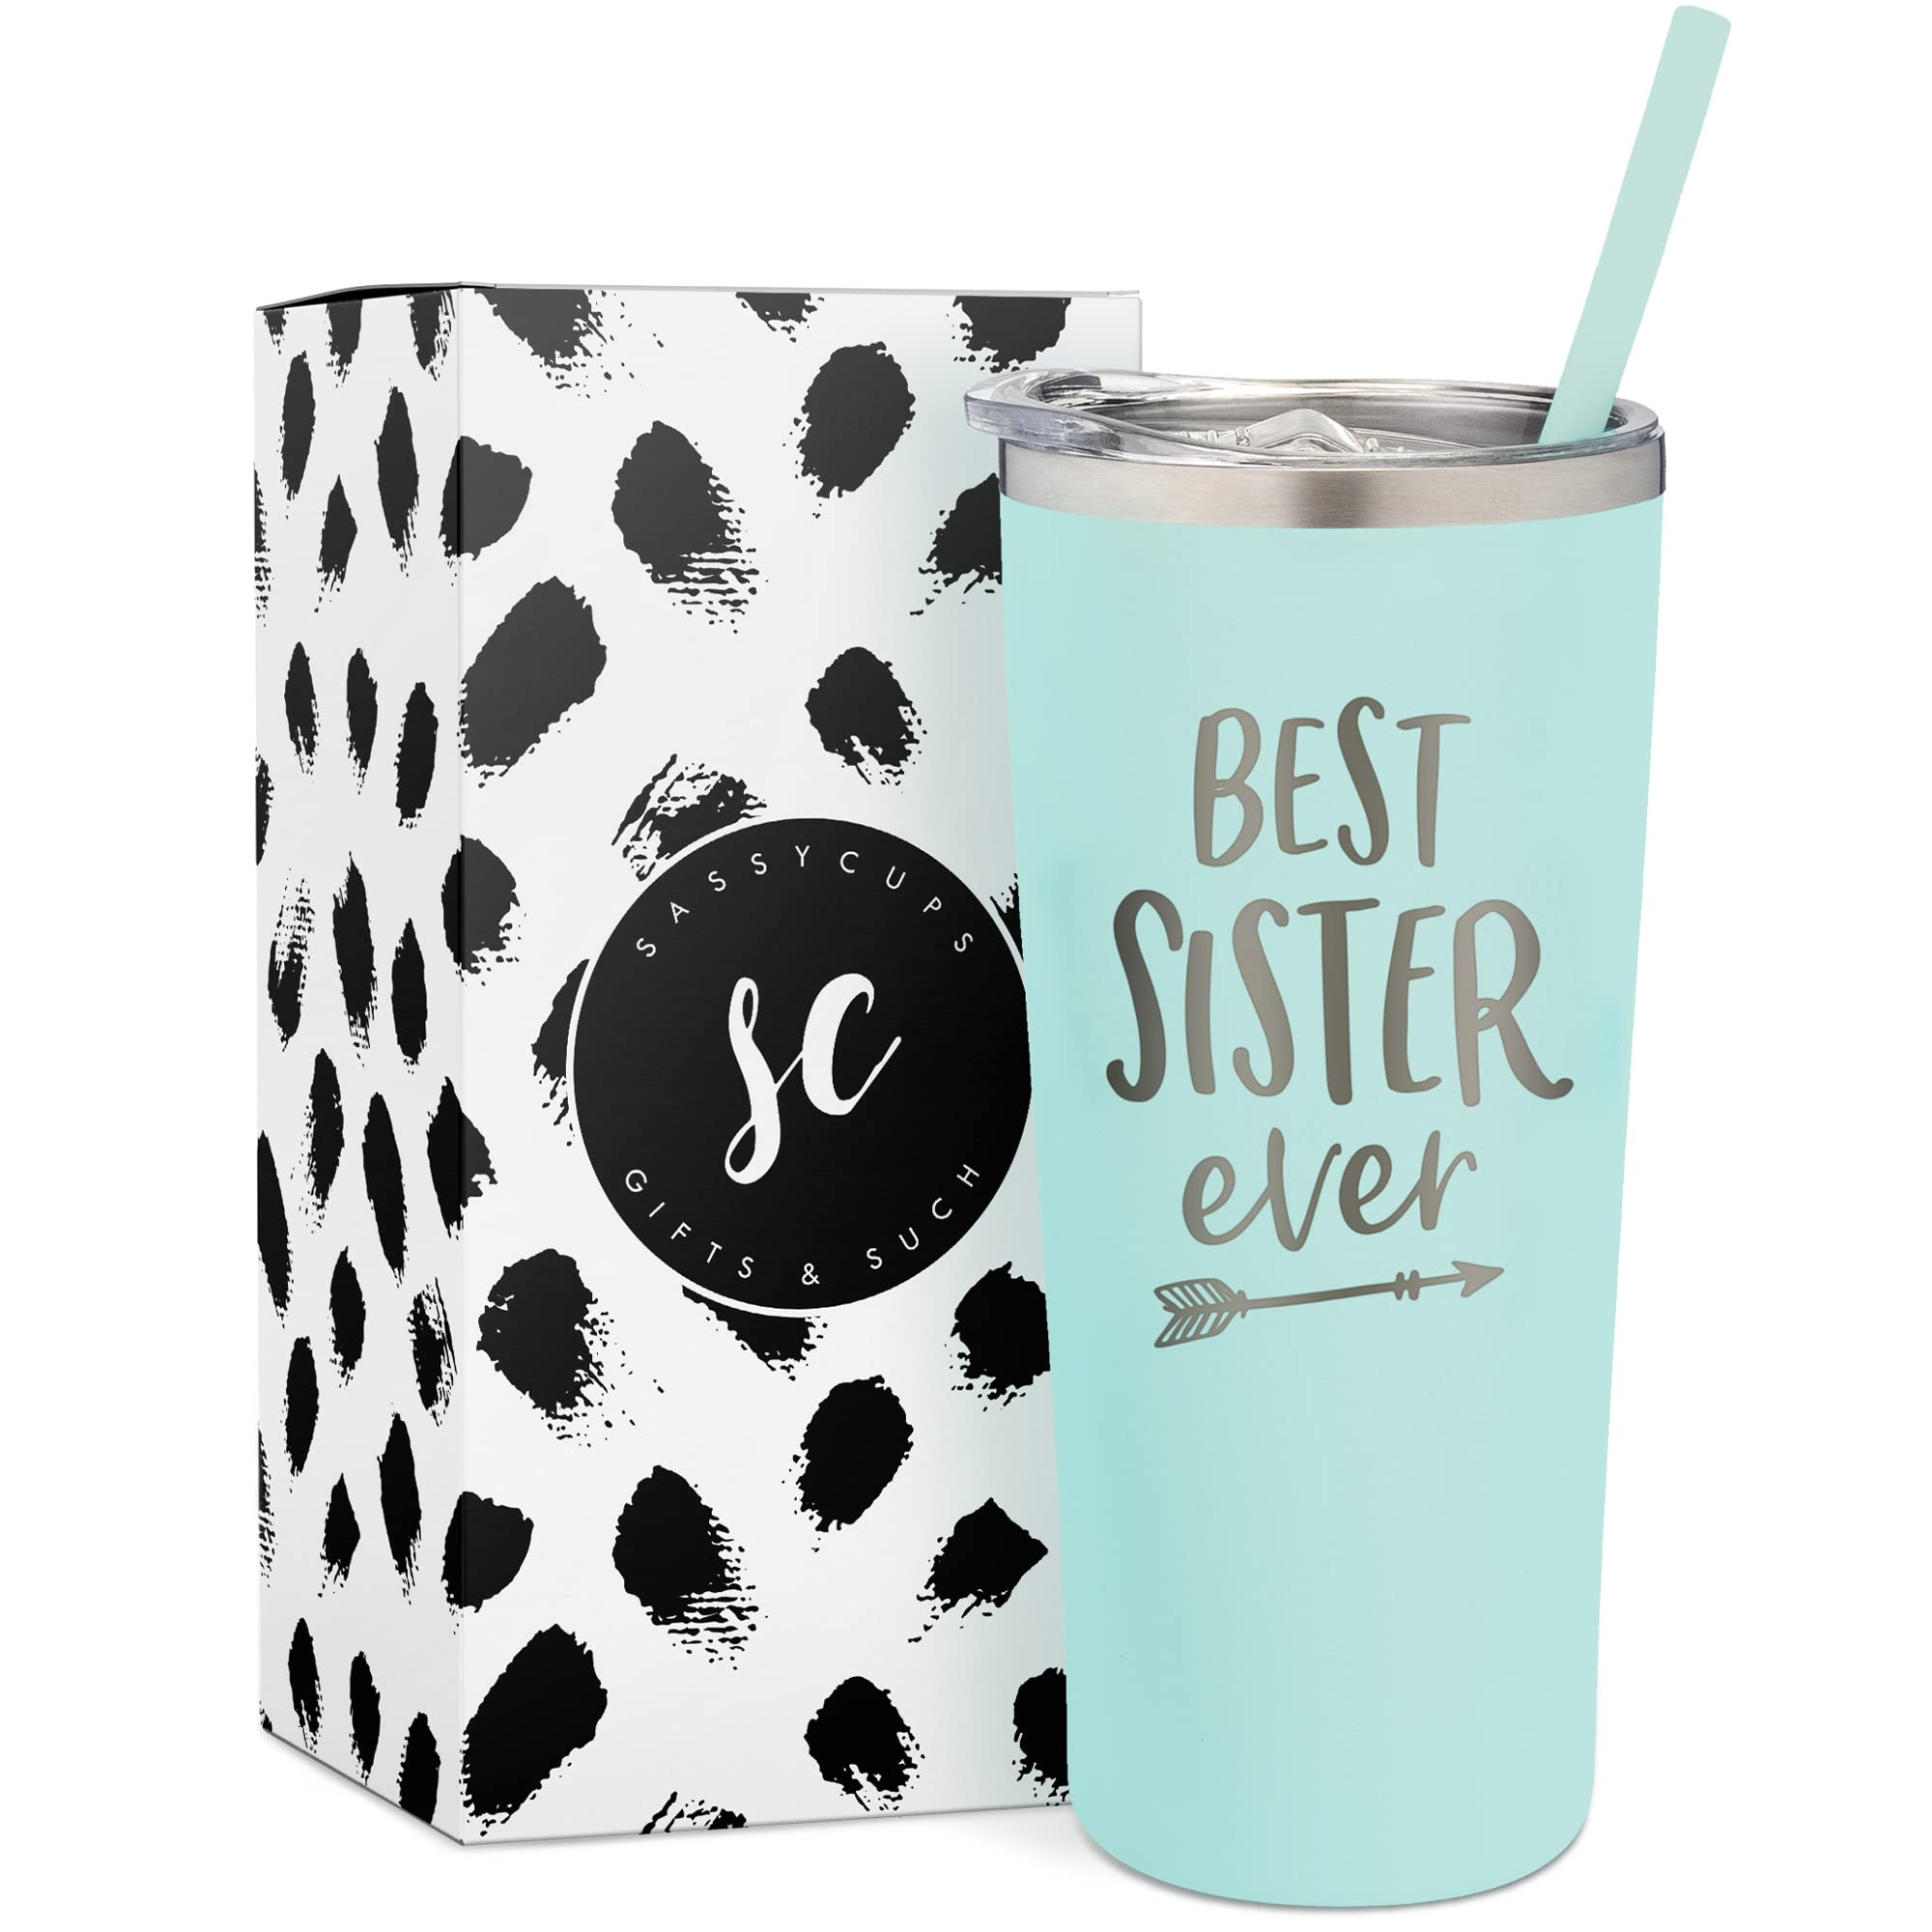 Best Sister Ever Insulated Stainless Steel Tumbler Cup with Slide Close lid  and Straw - Insulated Mugs for Coffee, Wine & Travel, Personalized & Funny  Mugs - Best Little Sister - Big